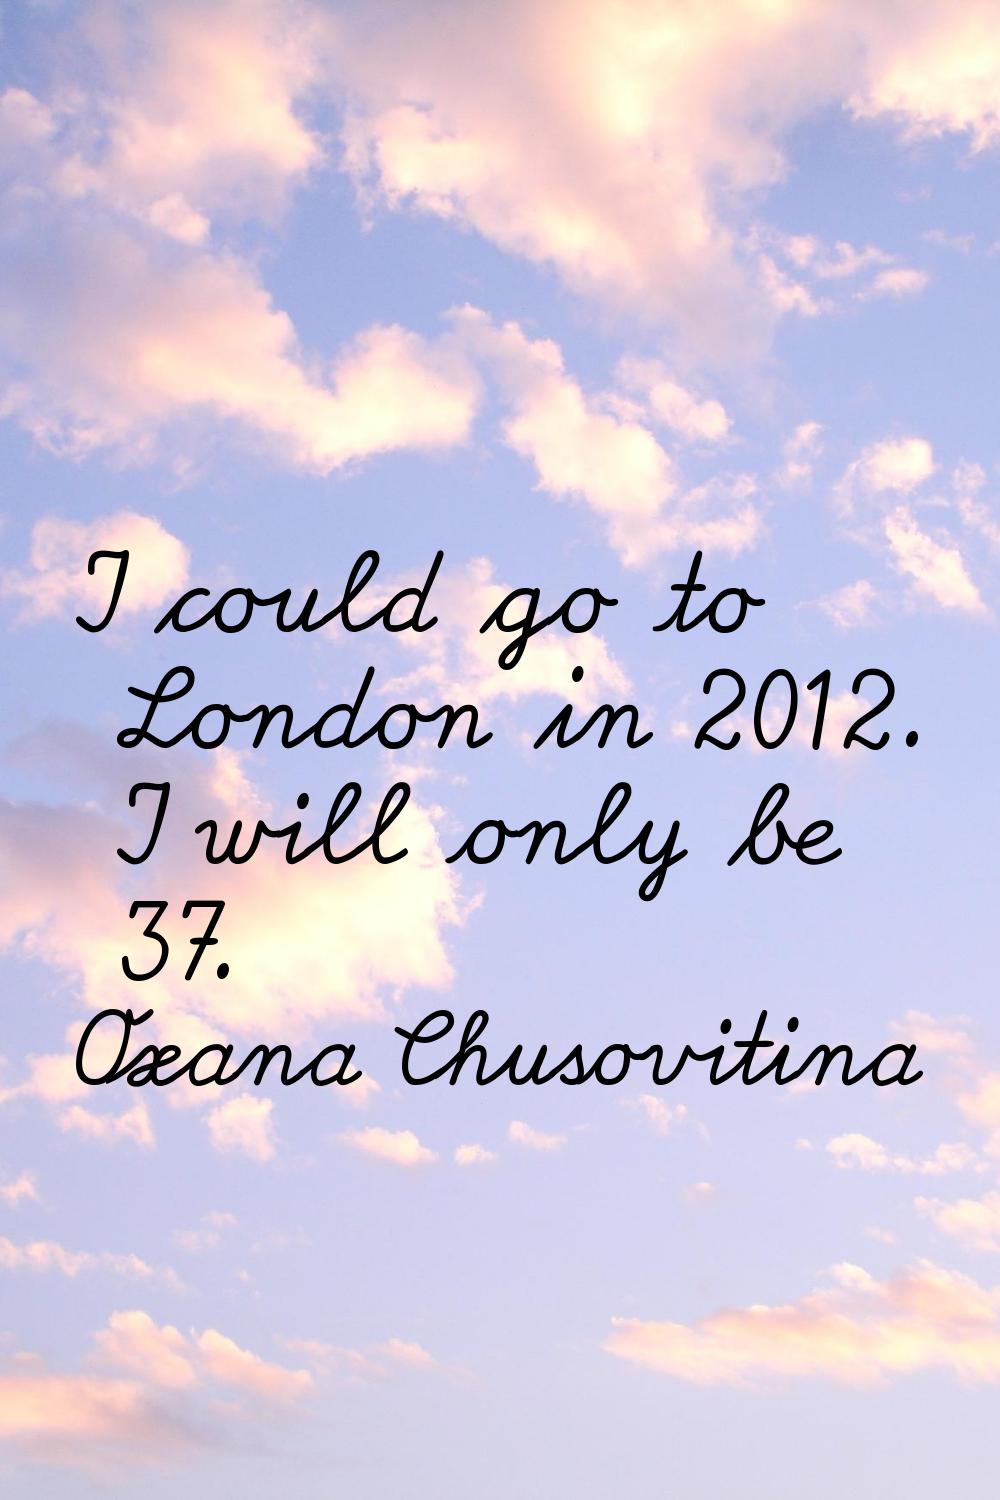 I could go to London in 2012. I will only be 37.